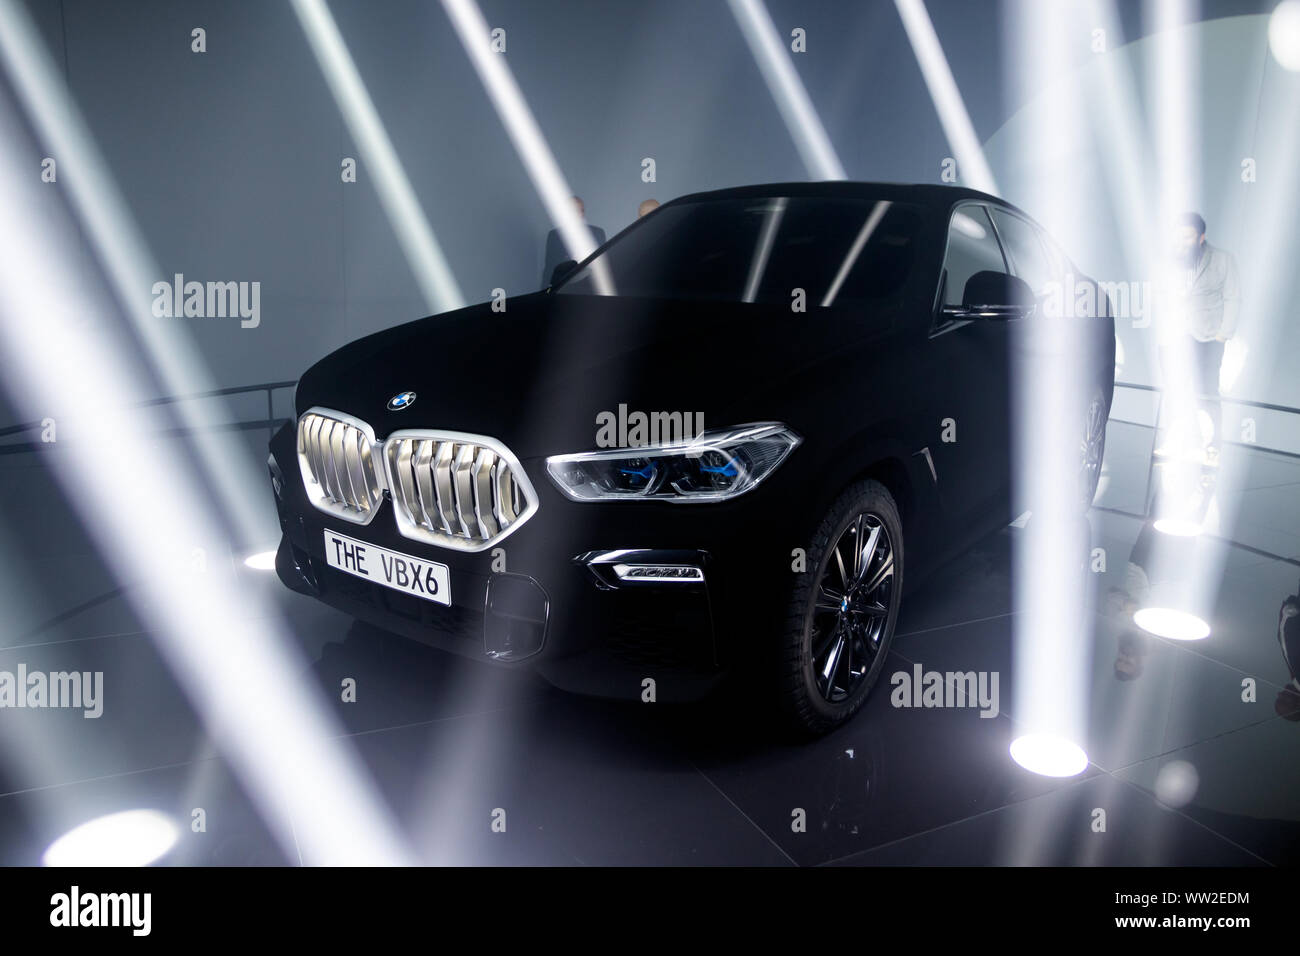 New BMW X6 as a spectacular show car: world's first vehicle in Vantablack®.